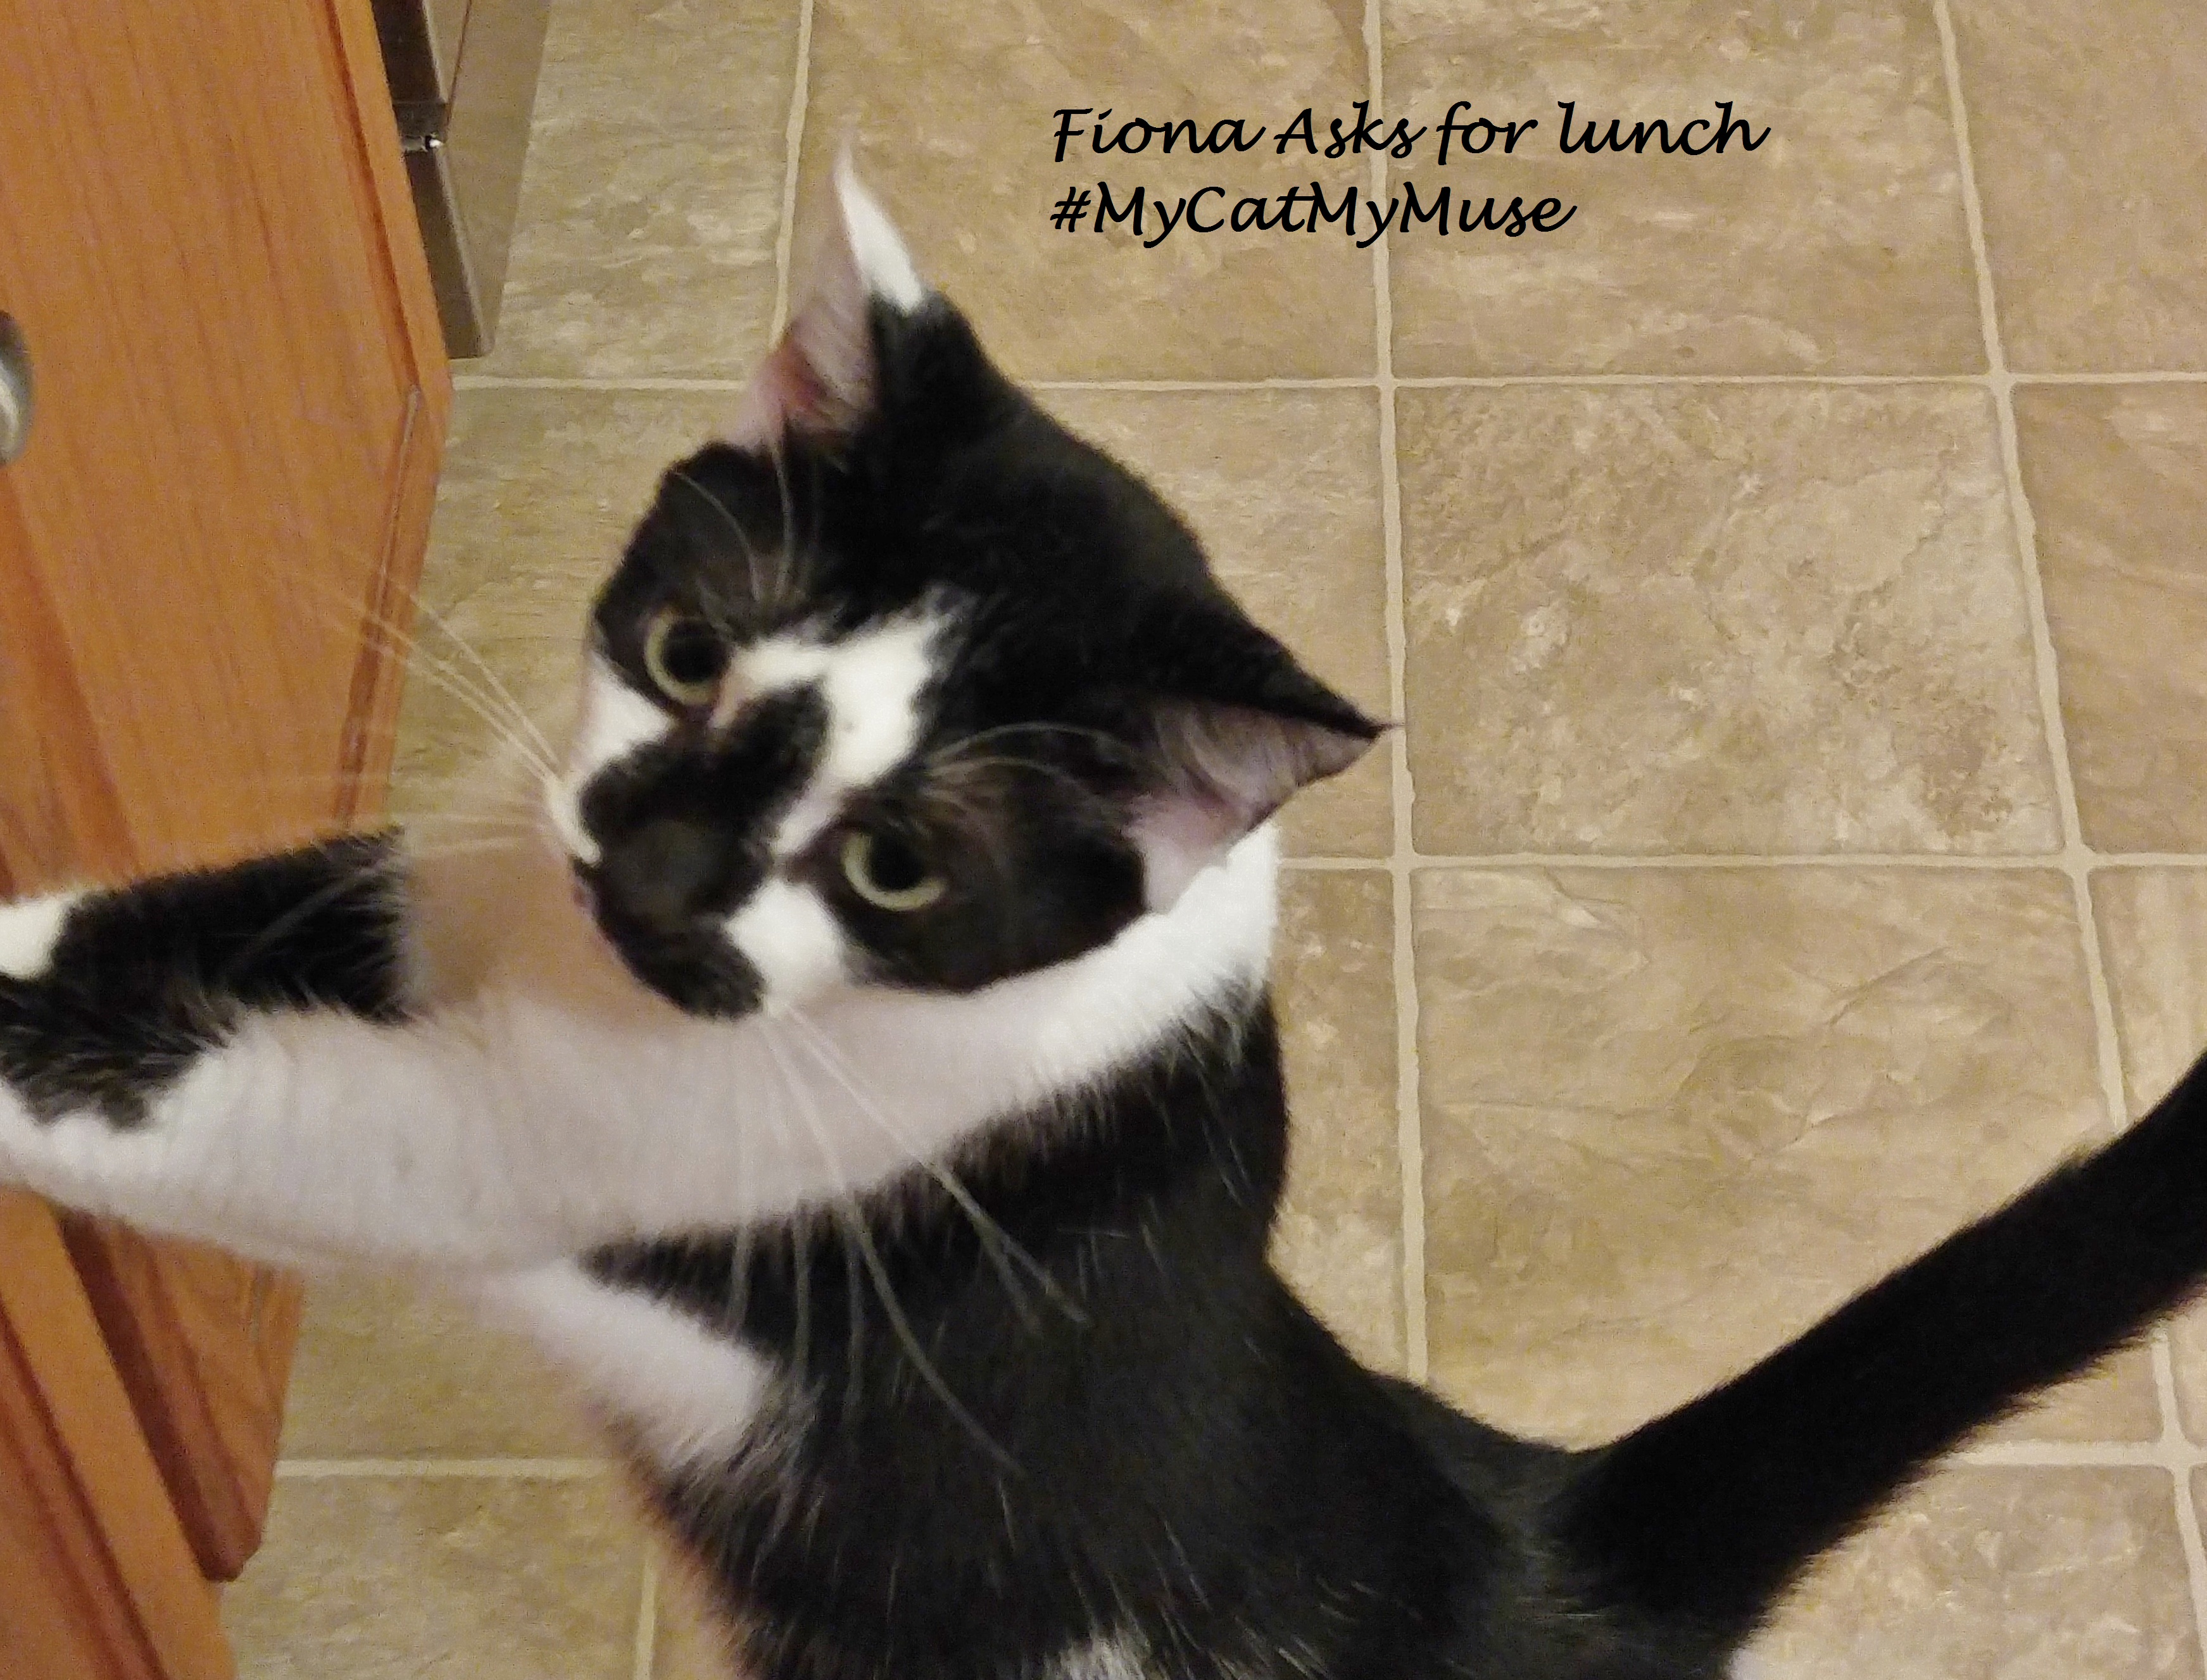 Fiona asks for lunch #MyCatMyMuse